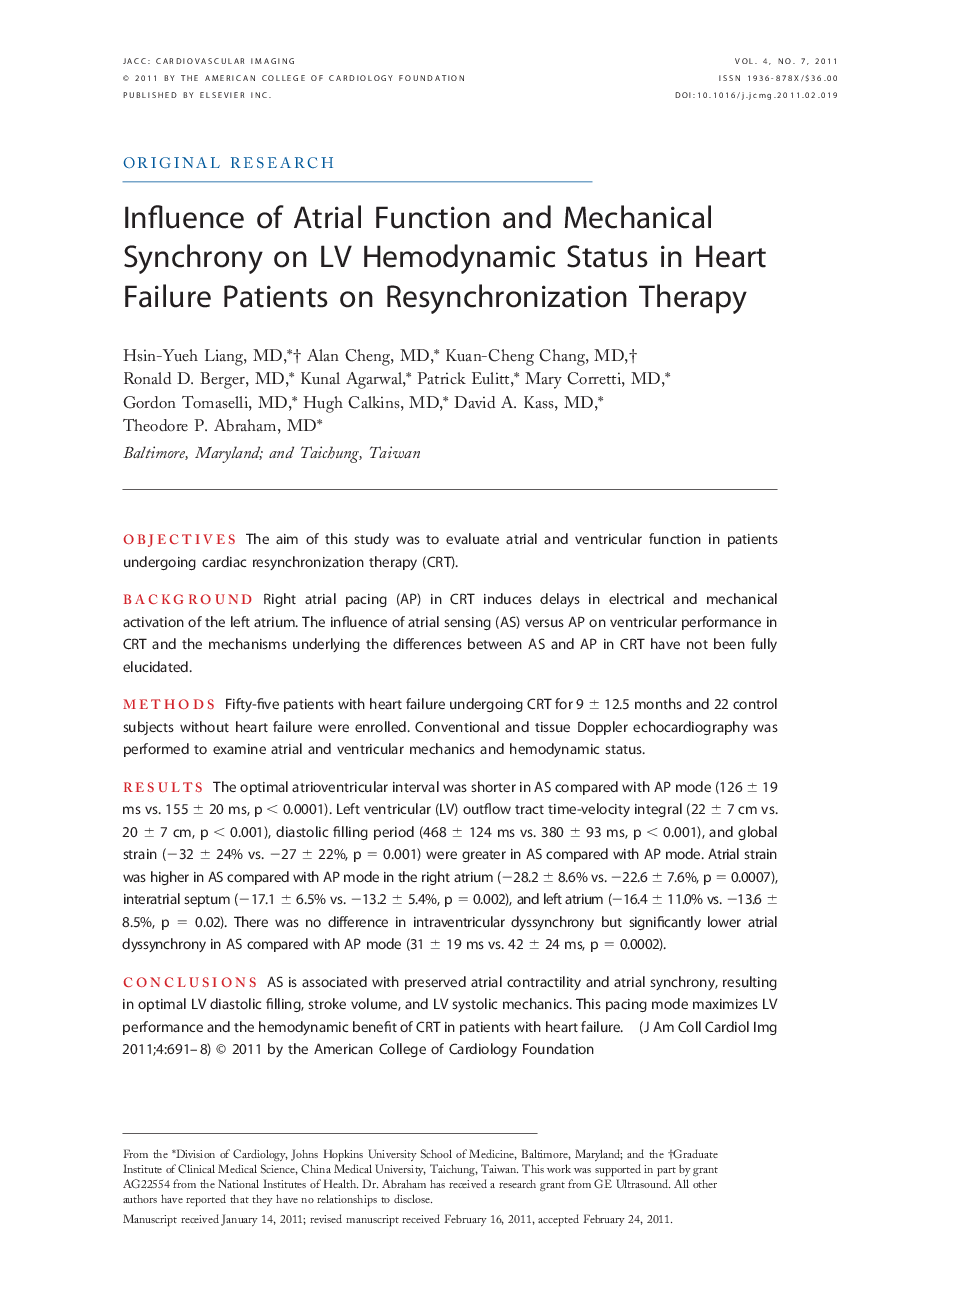 Influence of Atrial Function and Mechanical Synchrony on LV Hemodynamic Status in Heart Failure Patients on Resynchronization Therapy 